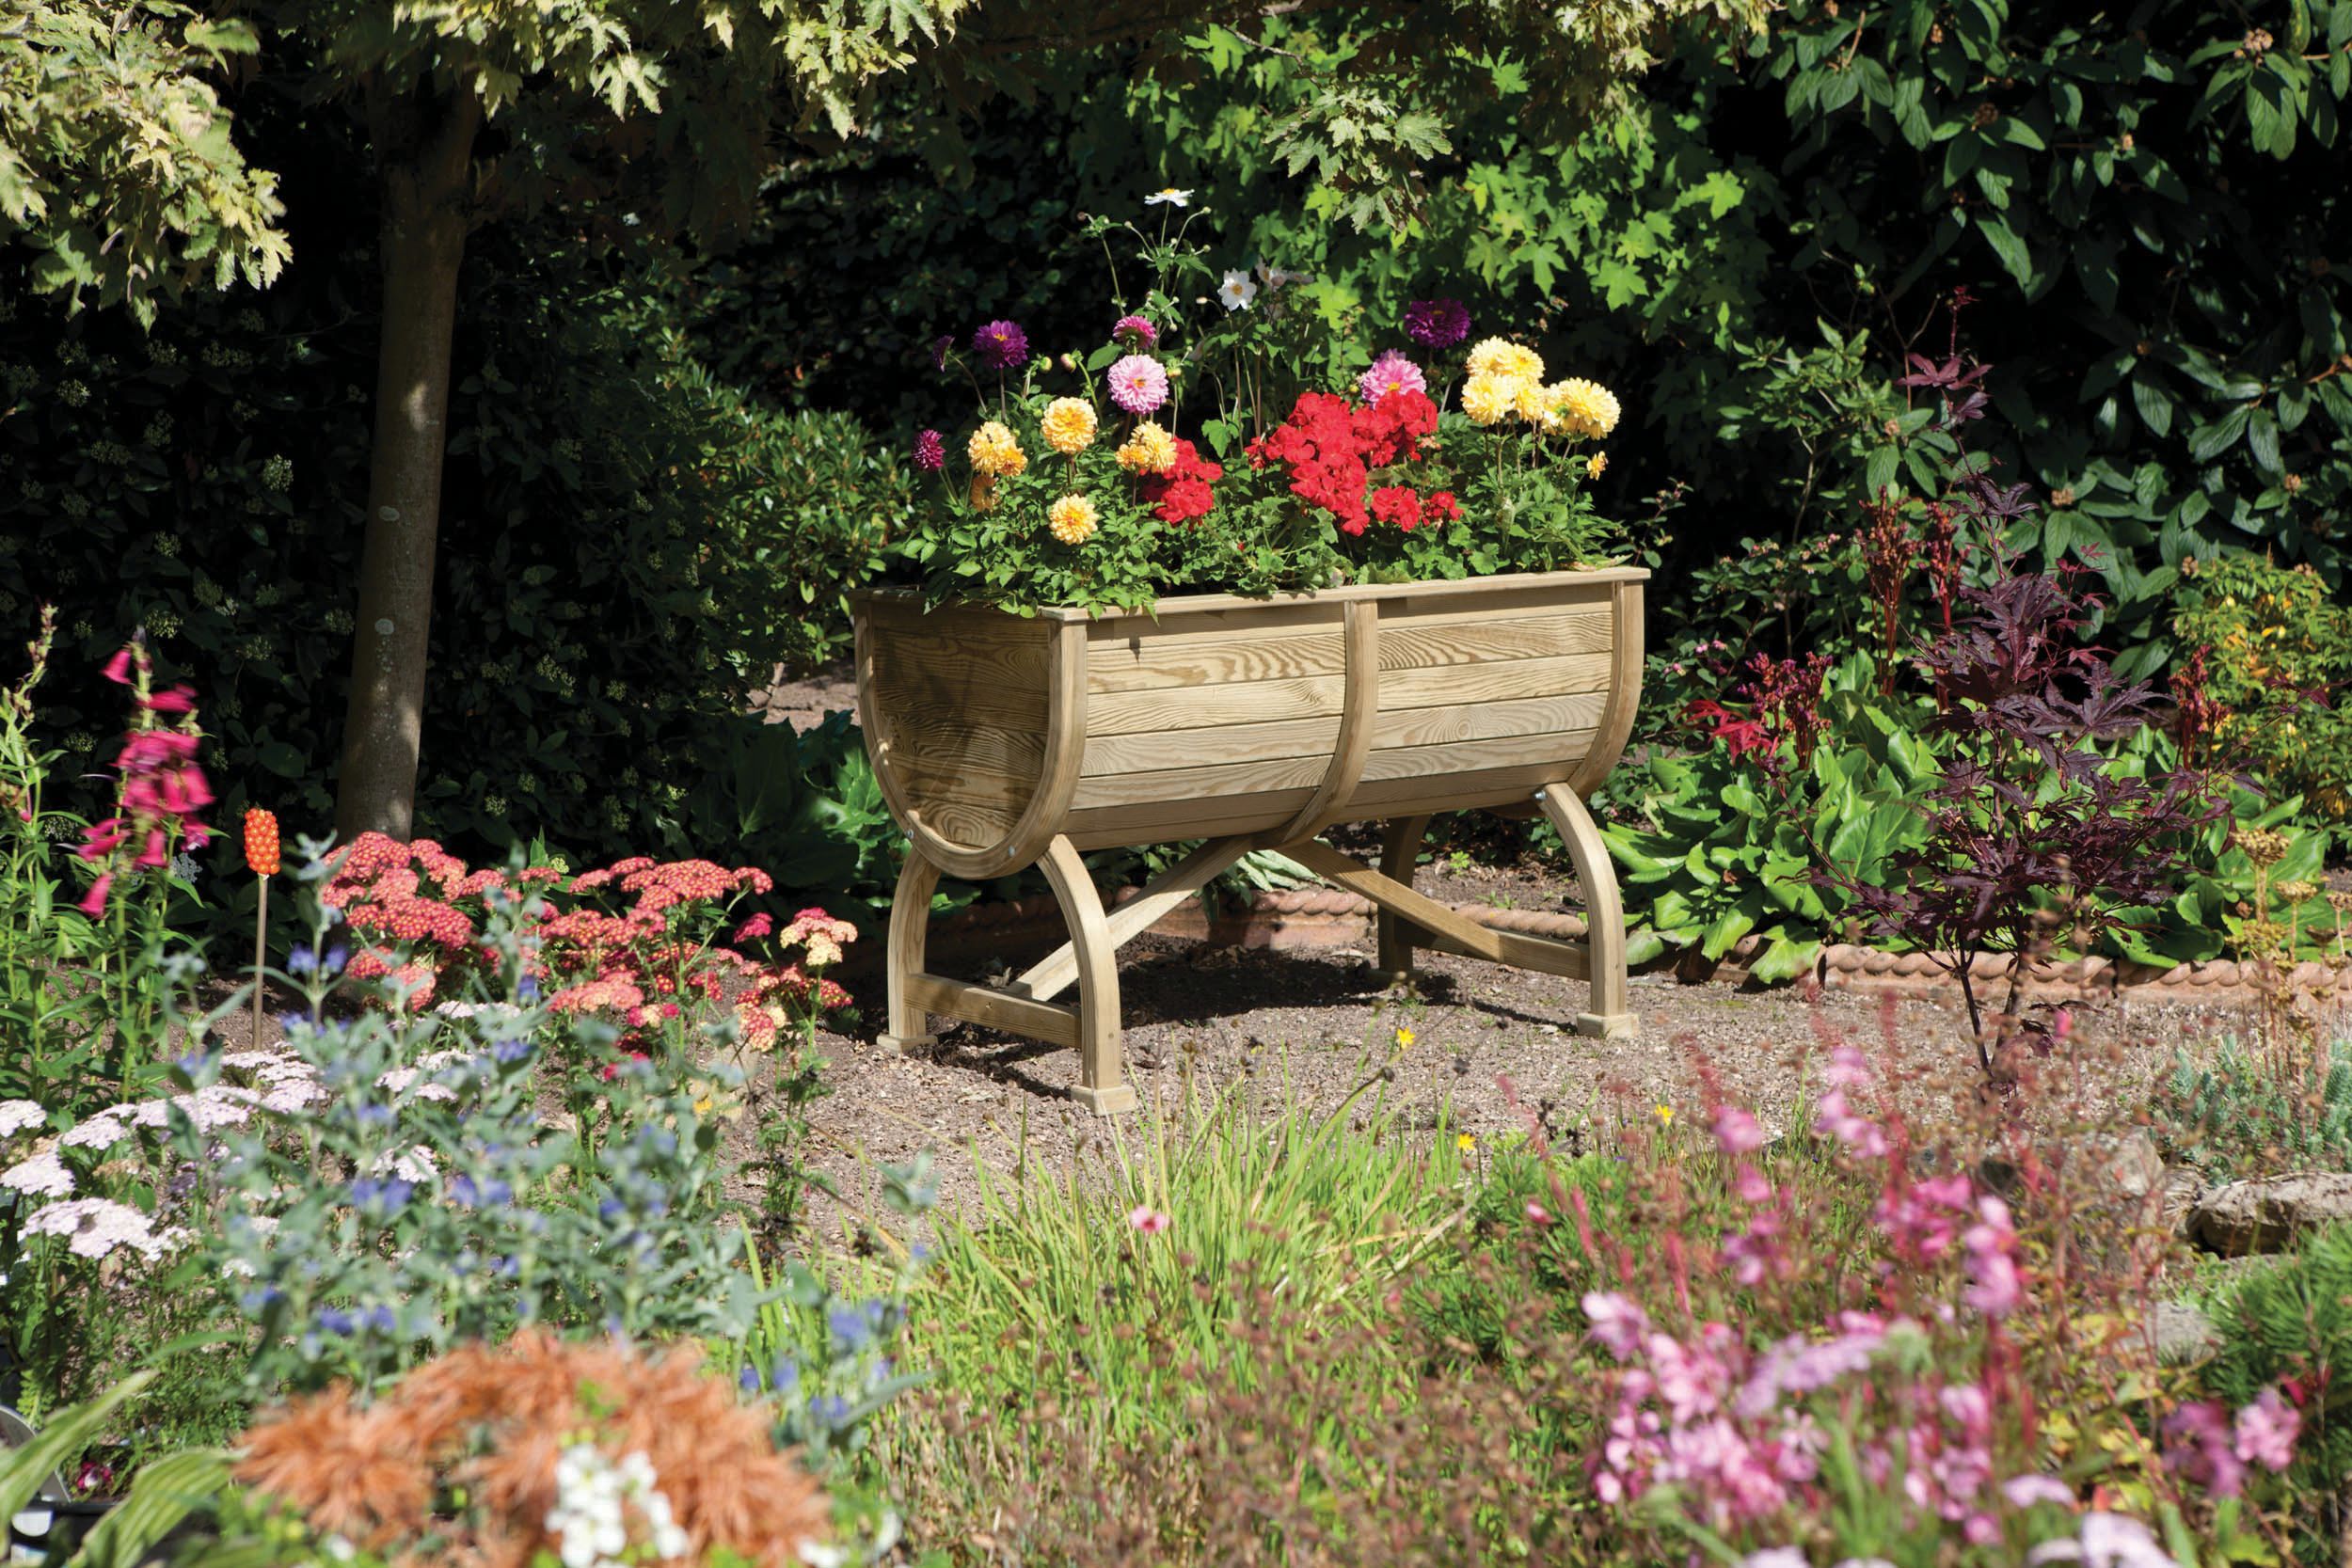 Image of Rowlinson Pressure Treated Marberry Barrel Planter - 715mm x 1m